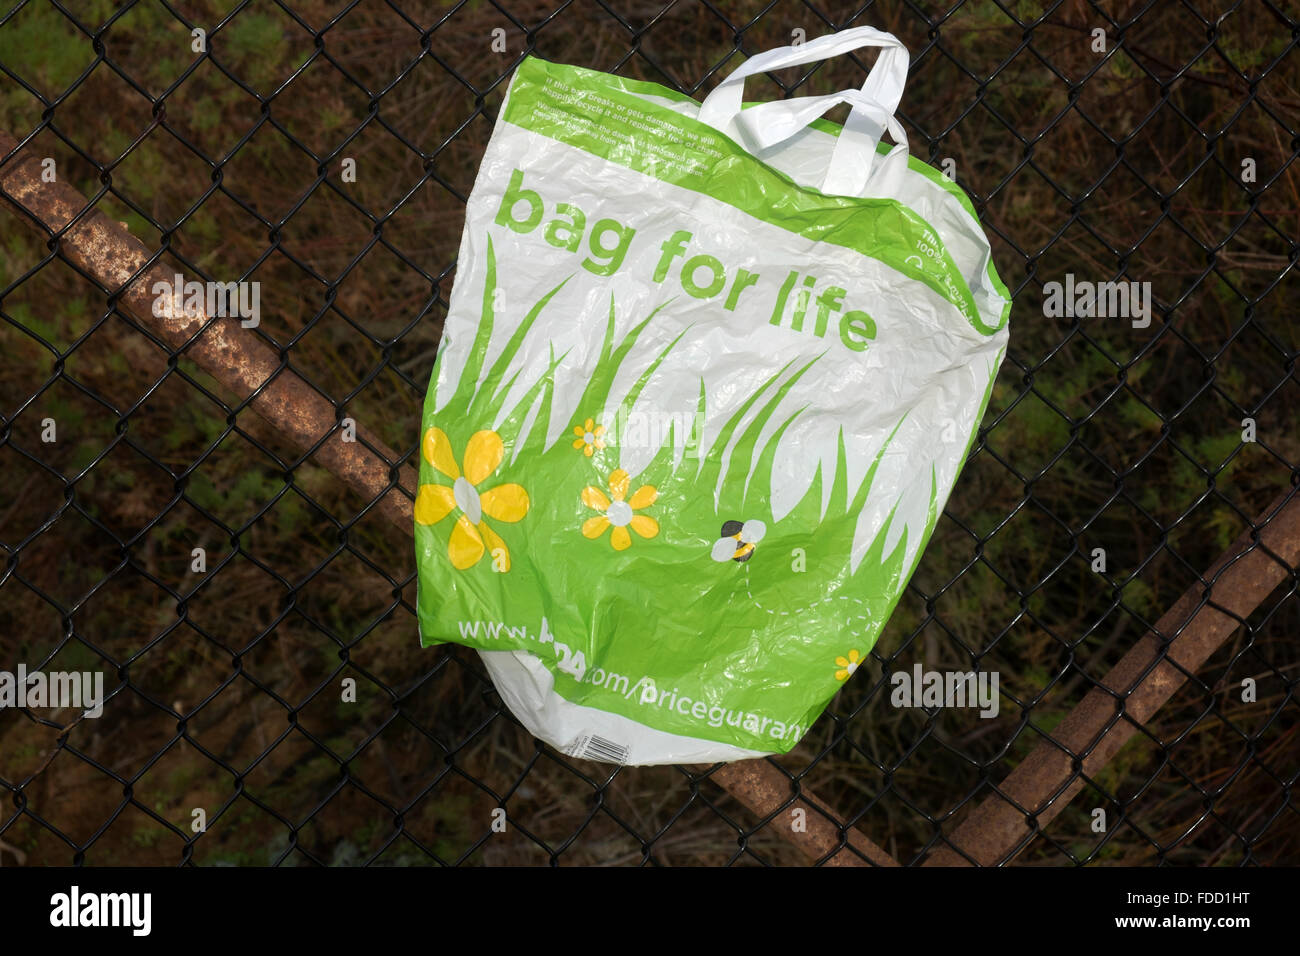 Bag for life hi-res stock photography and images - Alamy